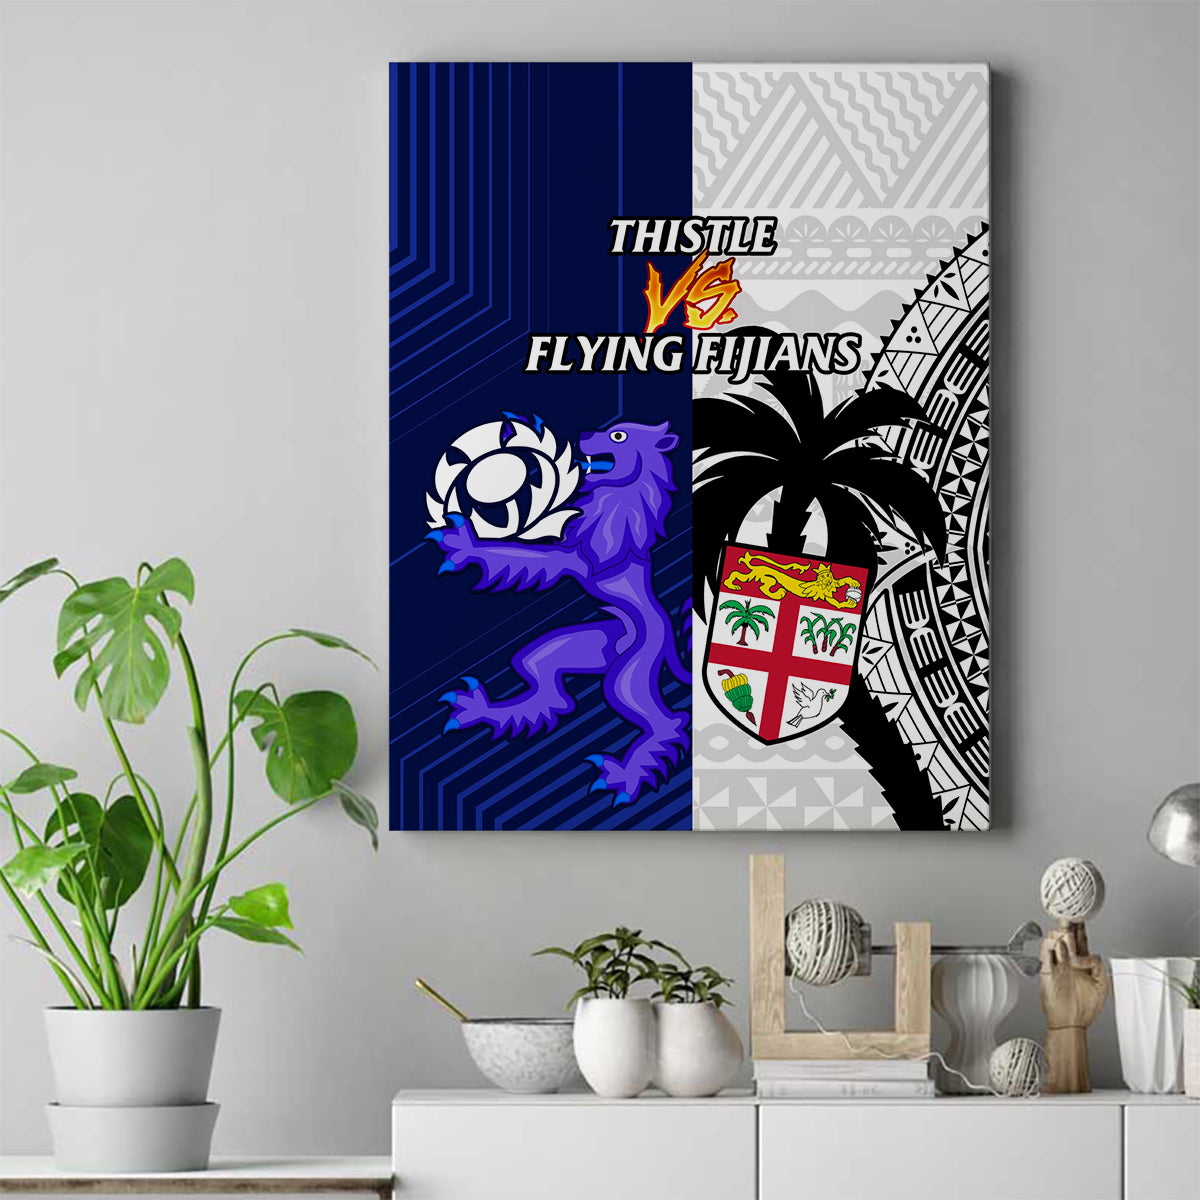 Fiji And Scotland Rugby Canvas Wall Art Fijian Tapa Pattern With Thistle LT14 Blue - Polynesian Pride